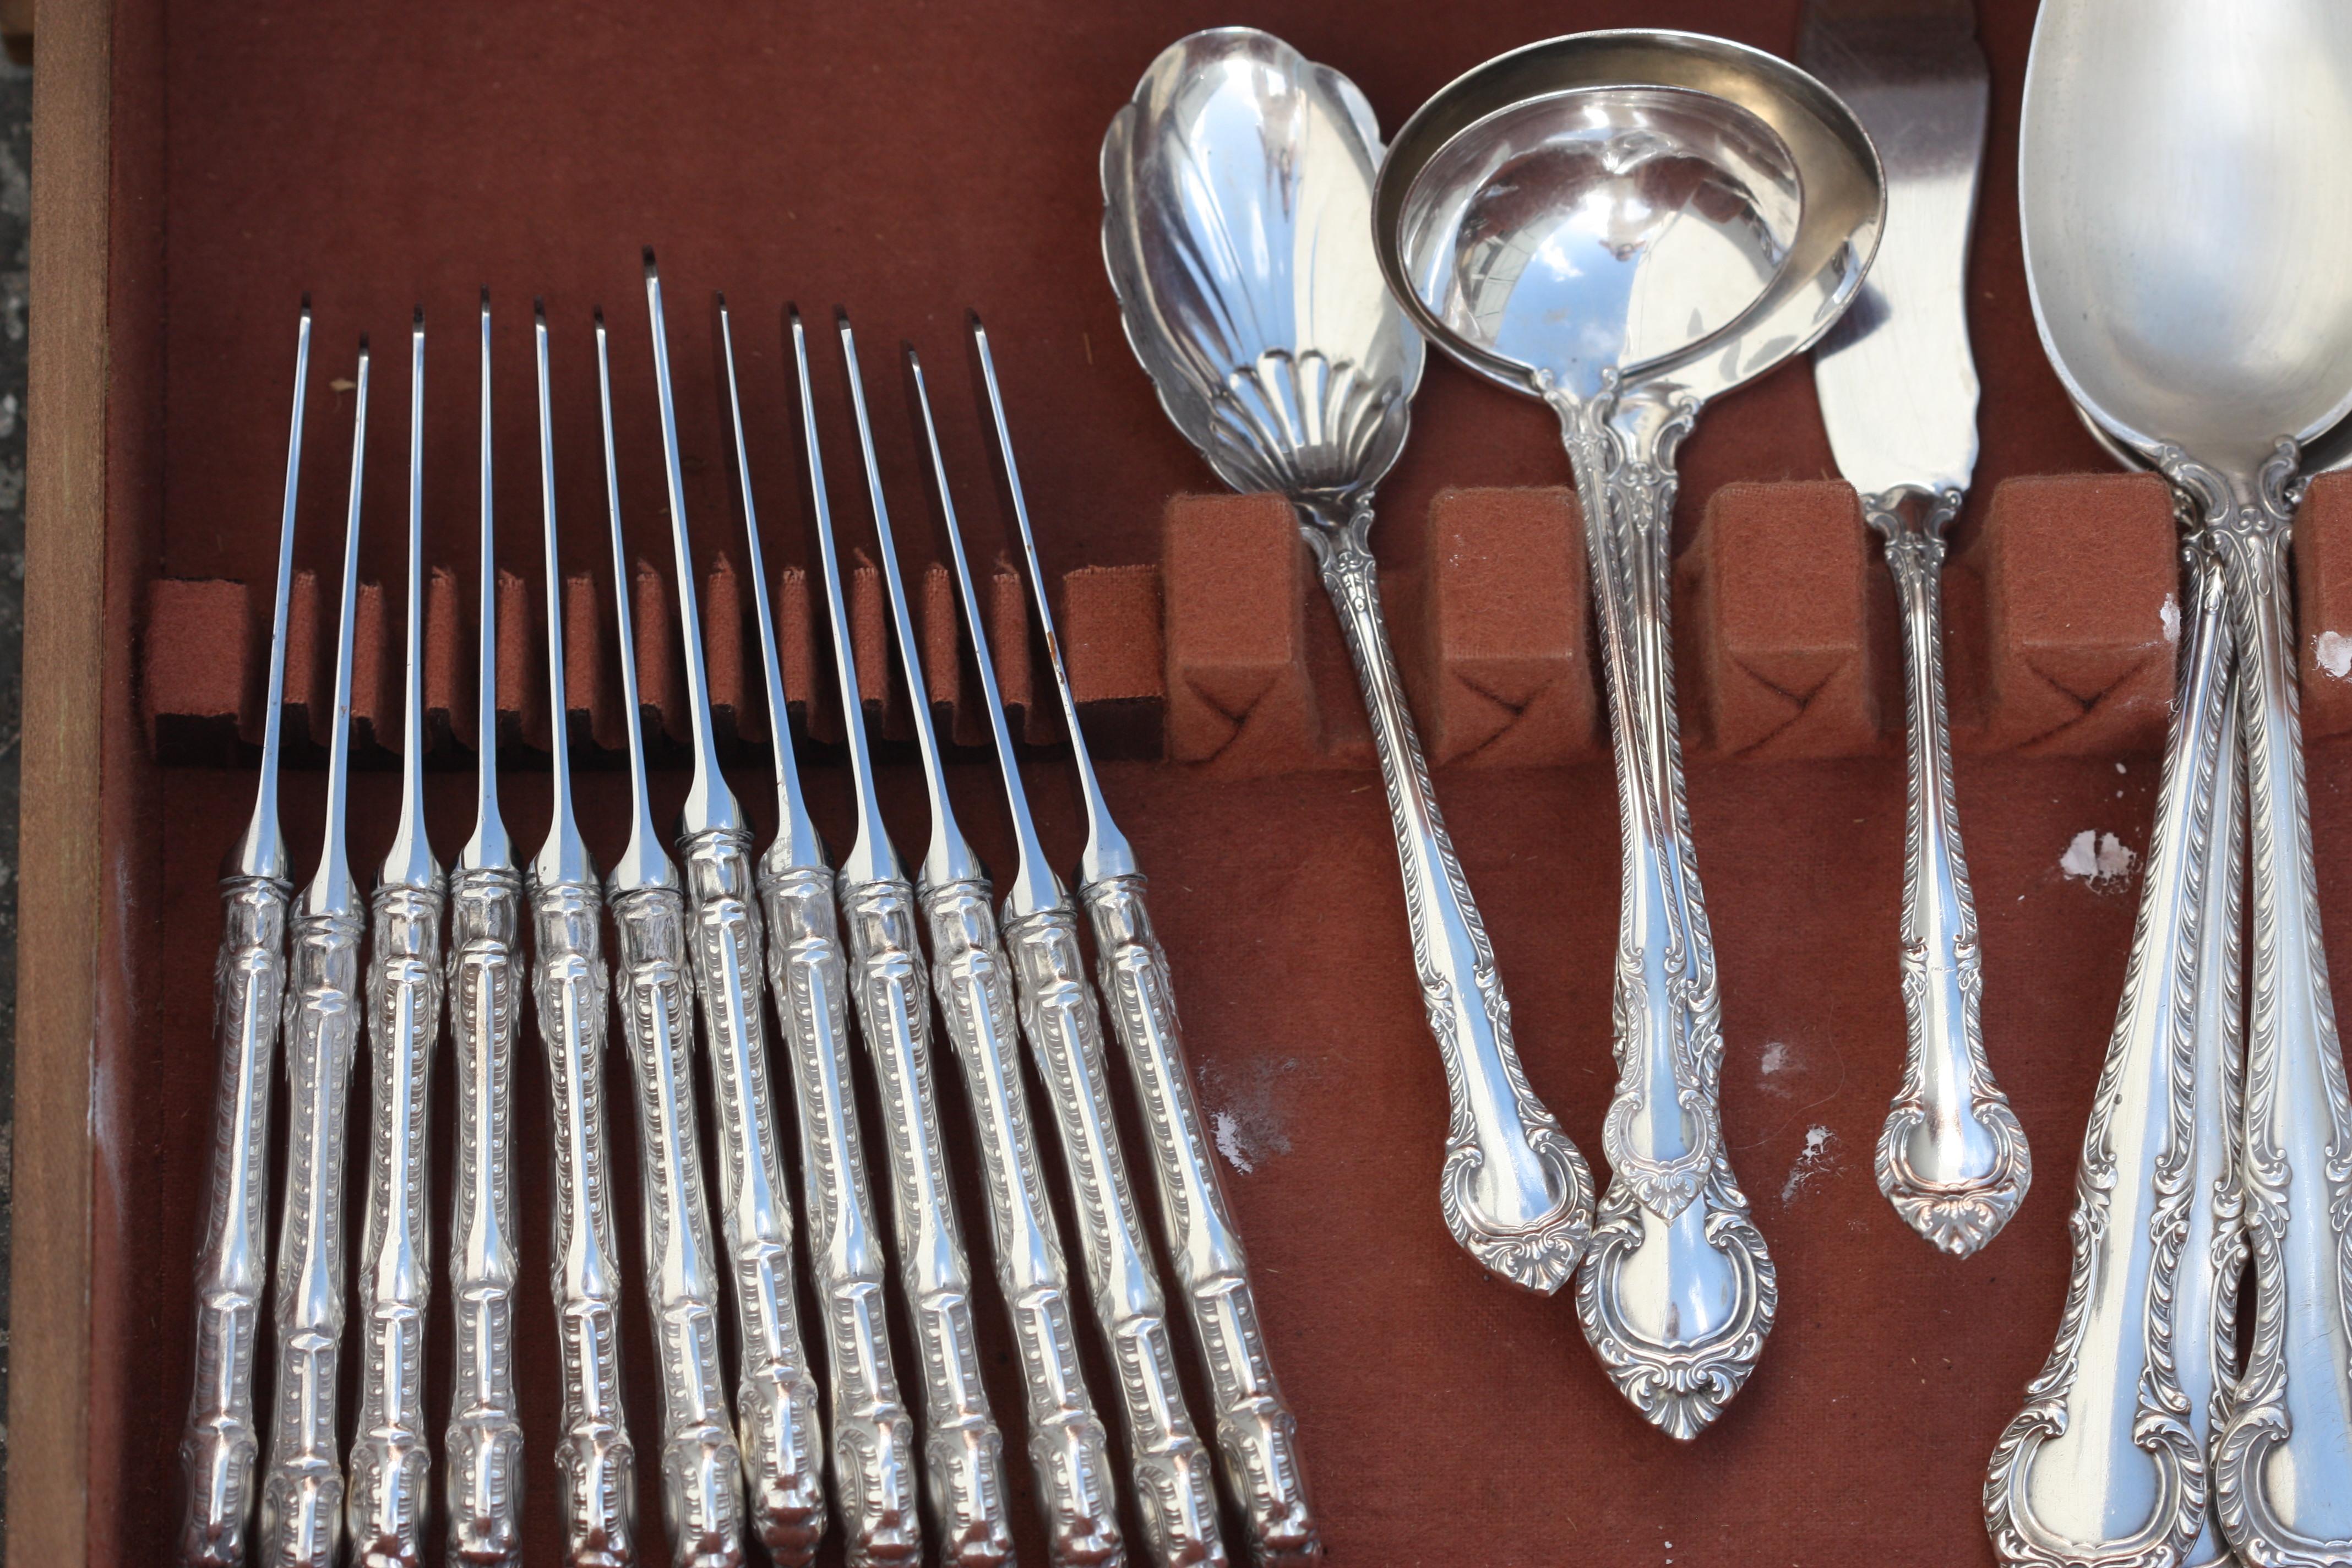 Gorham Sterling Silver Ninety-One Piece Flatware Service For Sale 2